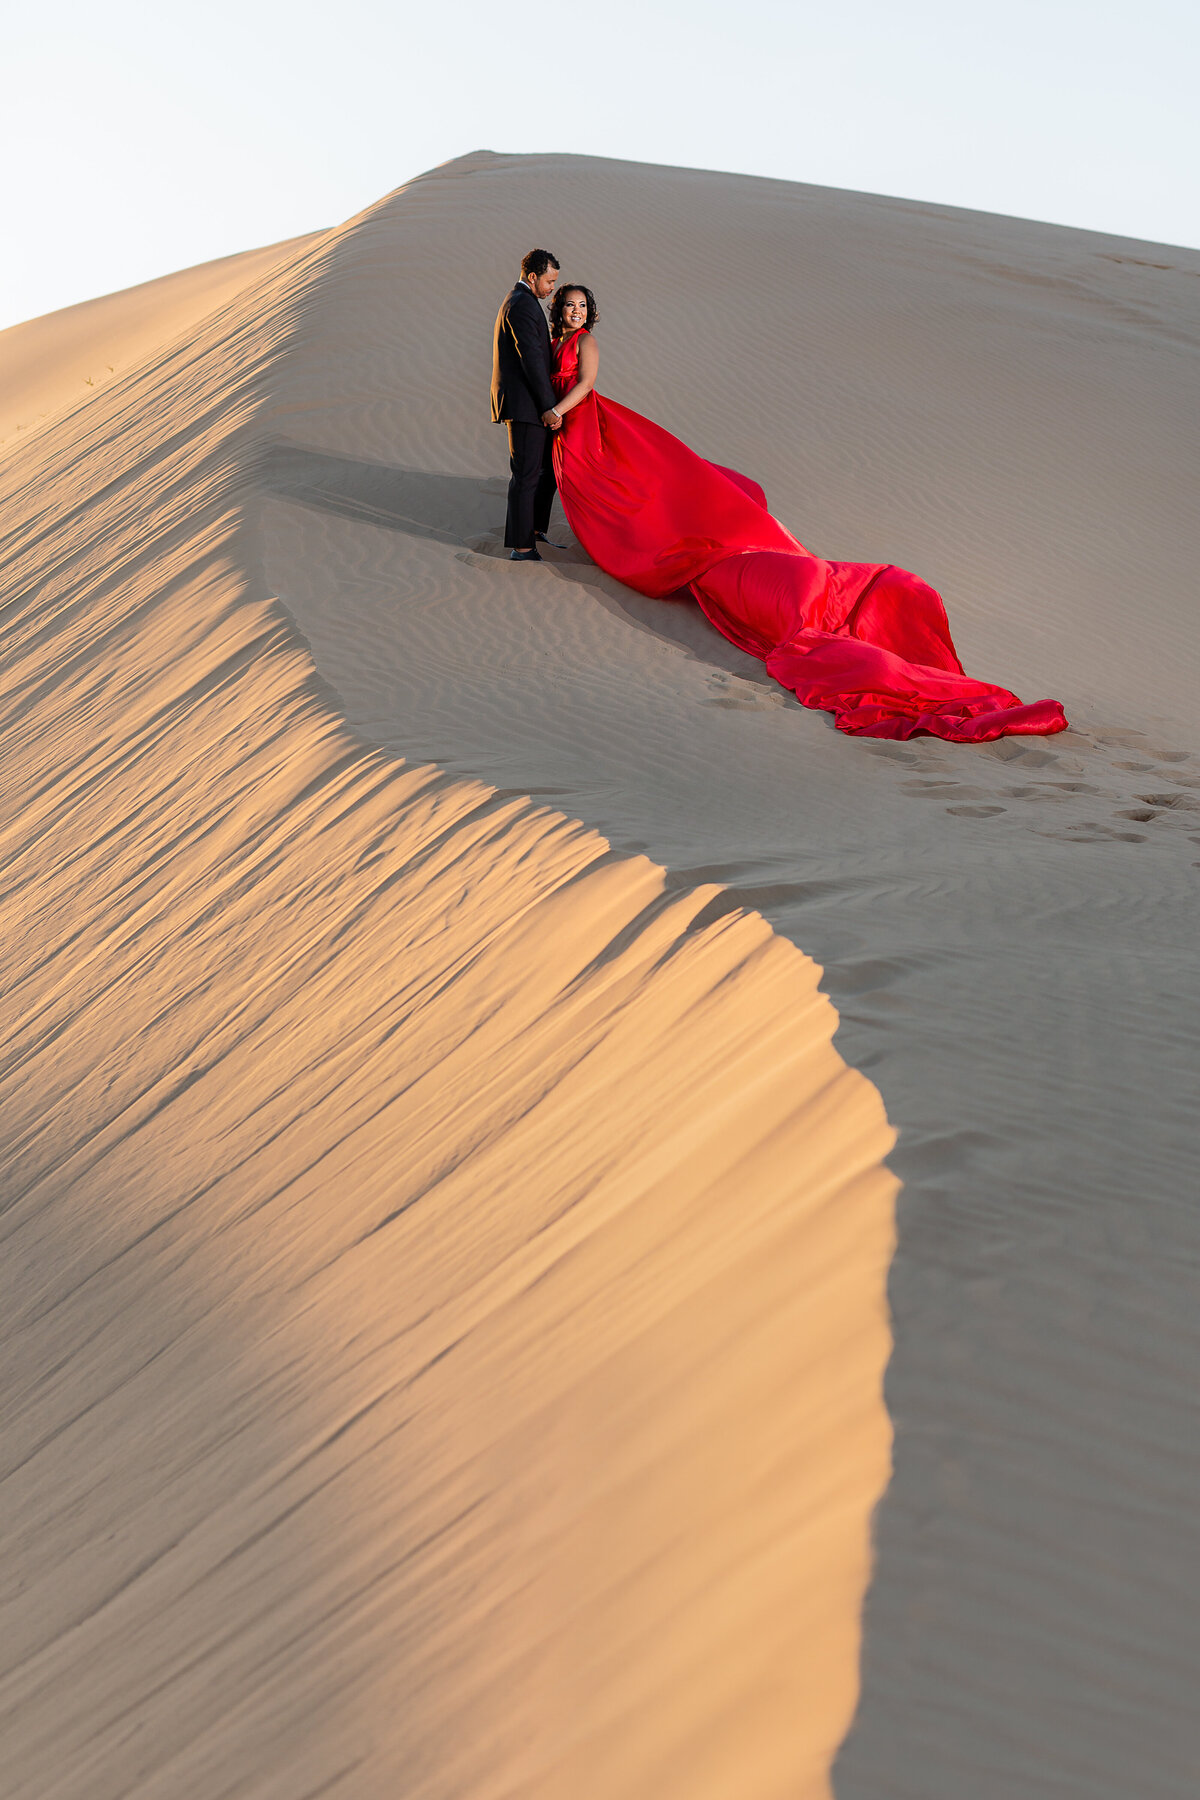 Glamis_Imperial_Sand_Dunes_Engagement_Robynn_Lawrence-54